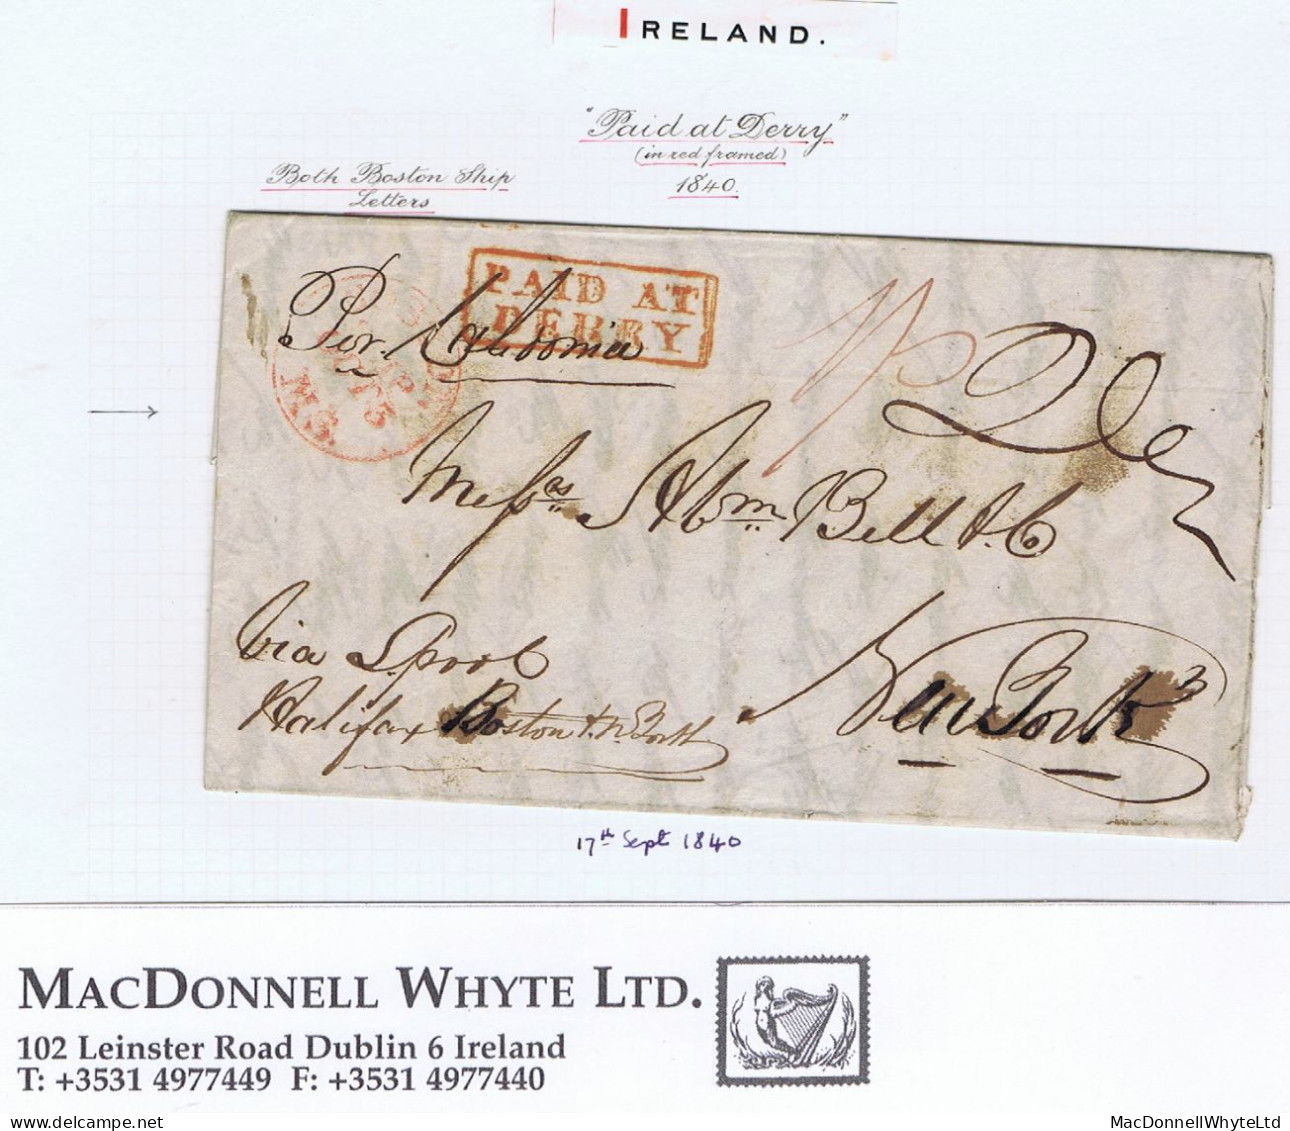 Ireland Derry TransatlanticUS 1840 Letter Londonderry To New York Paid "1/-" With Boxed PAID AT/DERRY In Red BOSTON/SHIP - Préphilatélie